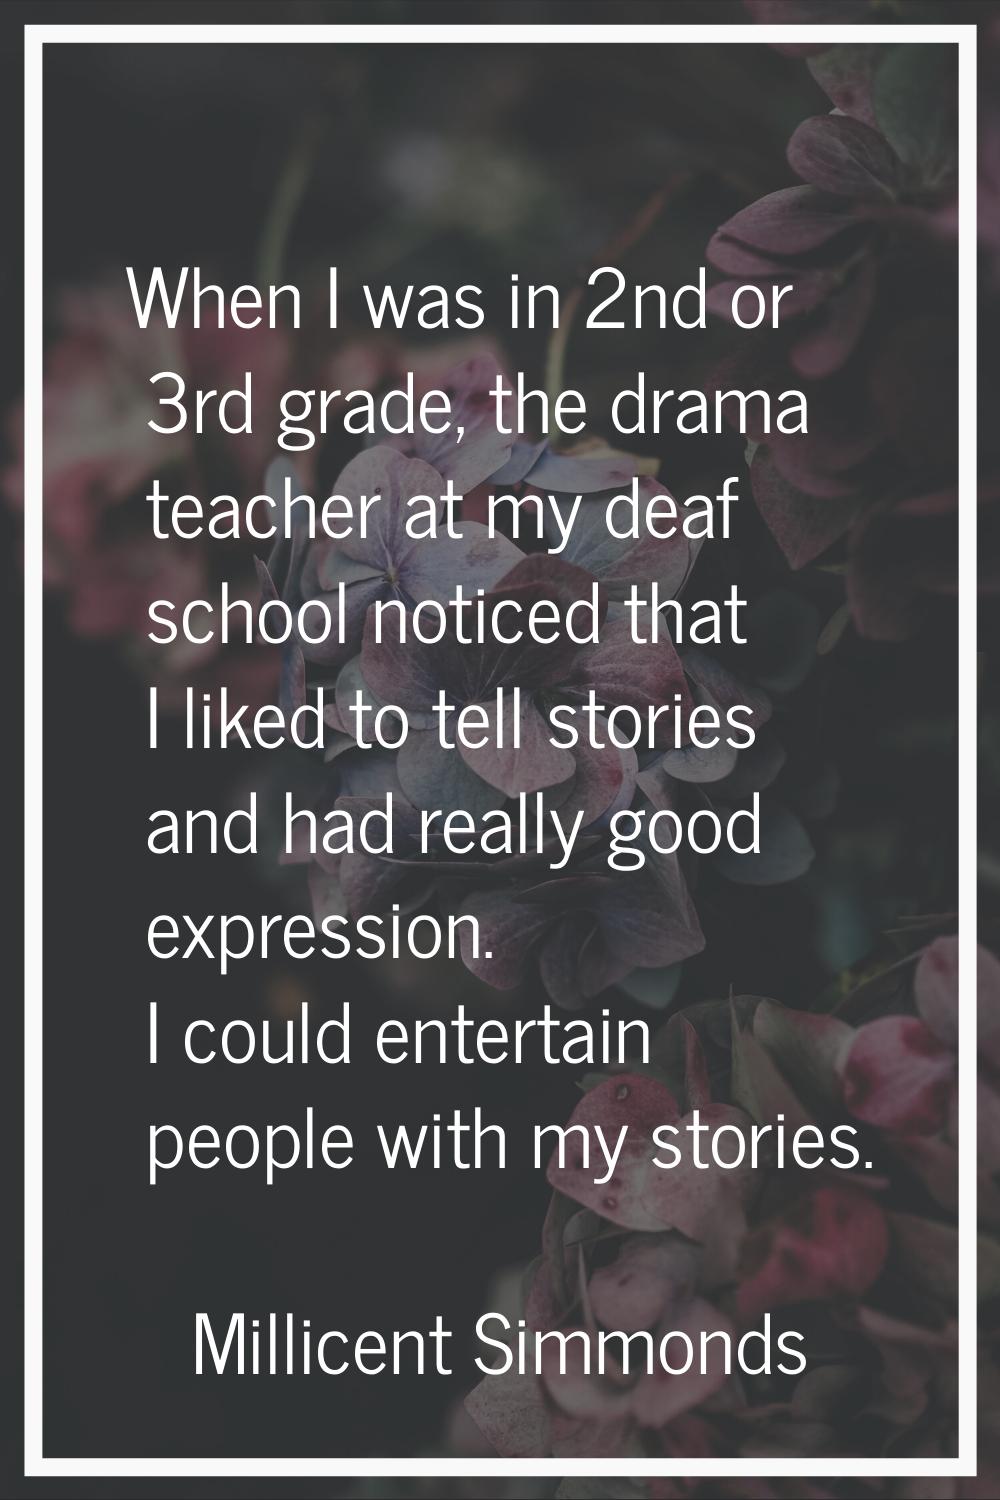 When I was in 2nd or 3rd grade, the drama teacher at my deaf school noticed that I liked to tell st